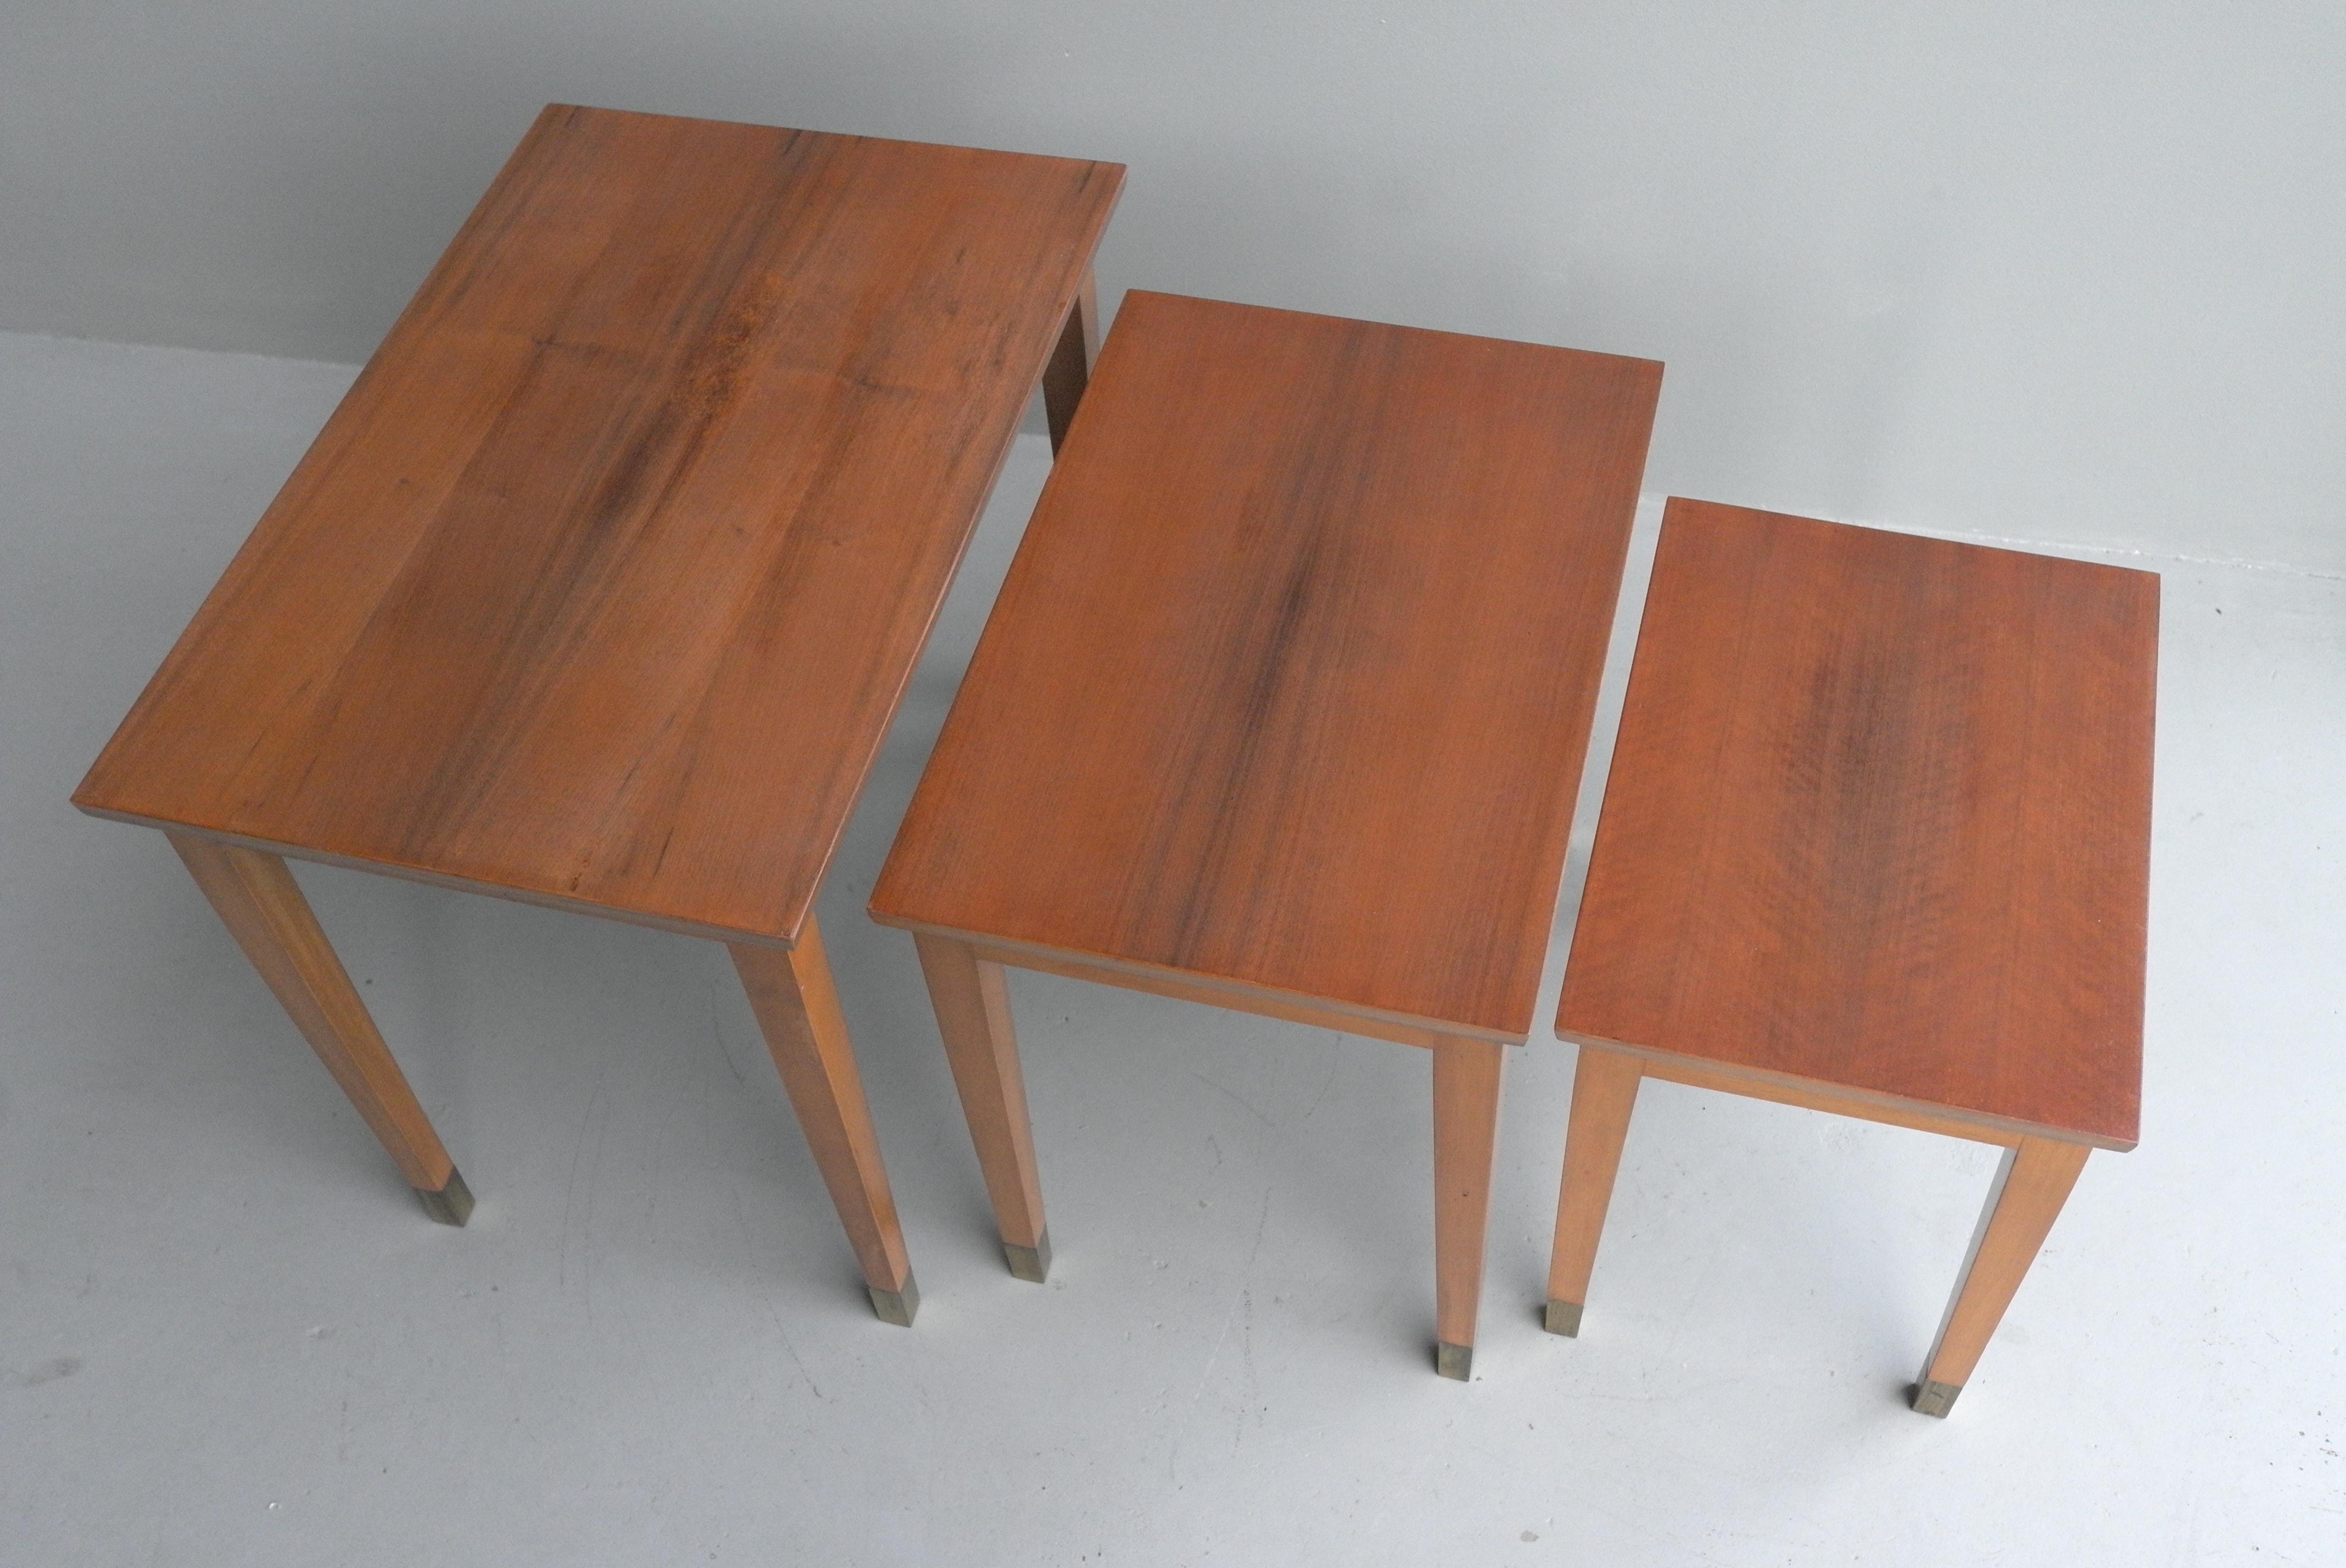 French 1940s Mahogany Wooden Nesting Tables with Brass Ends For Sale 1